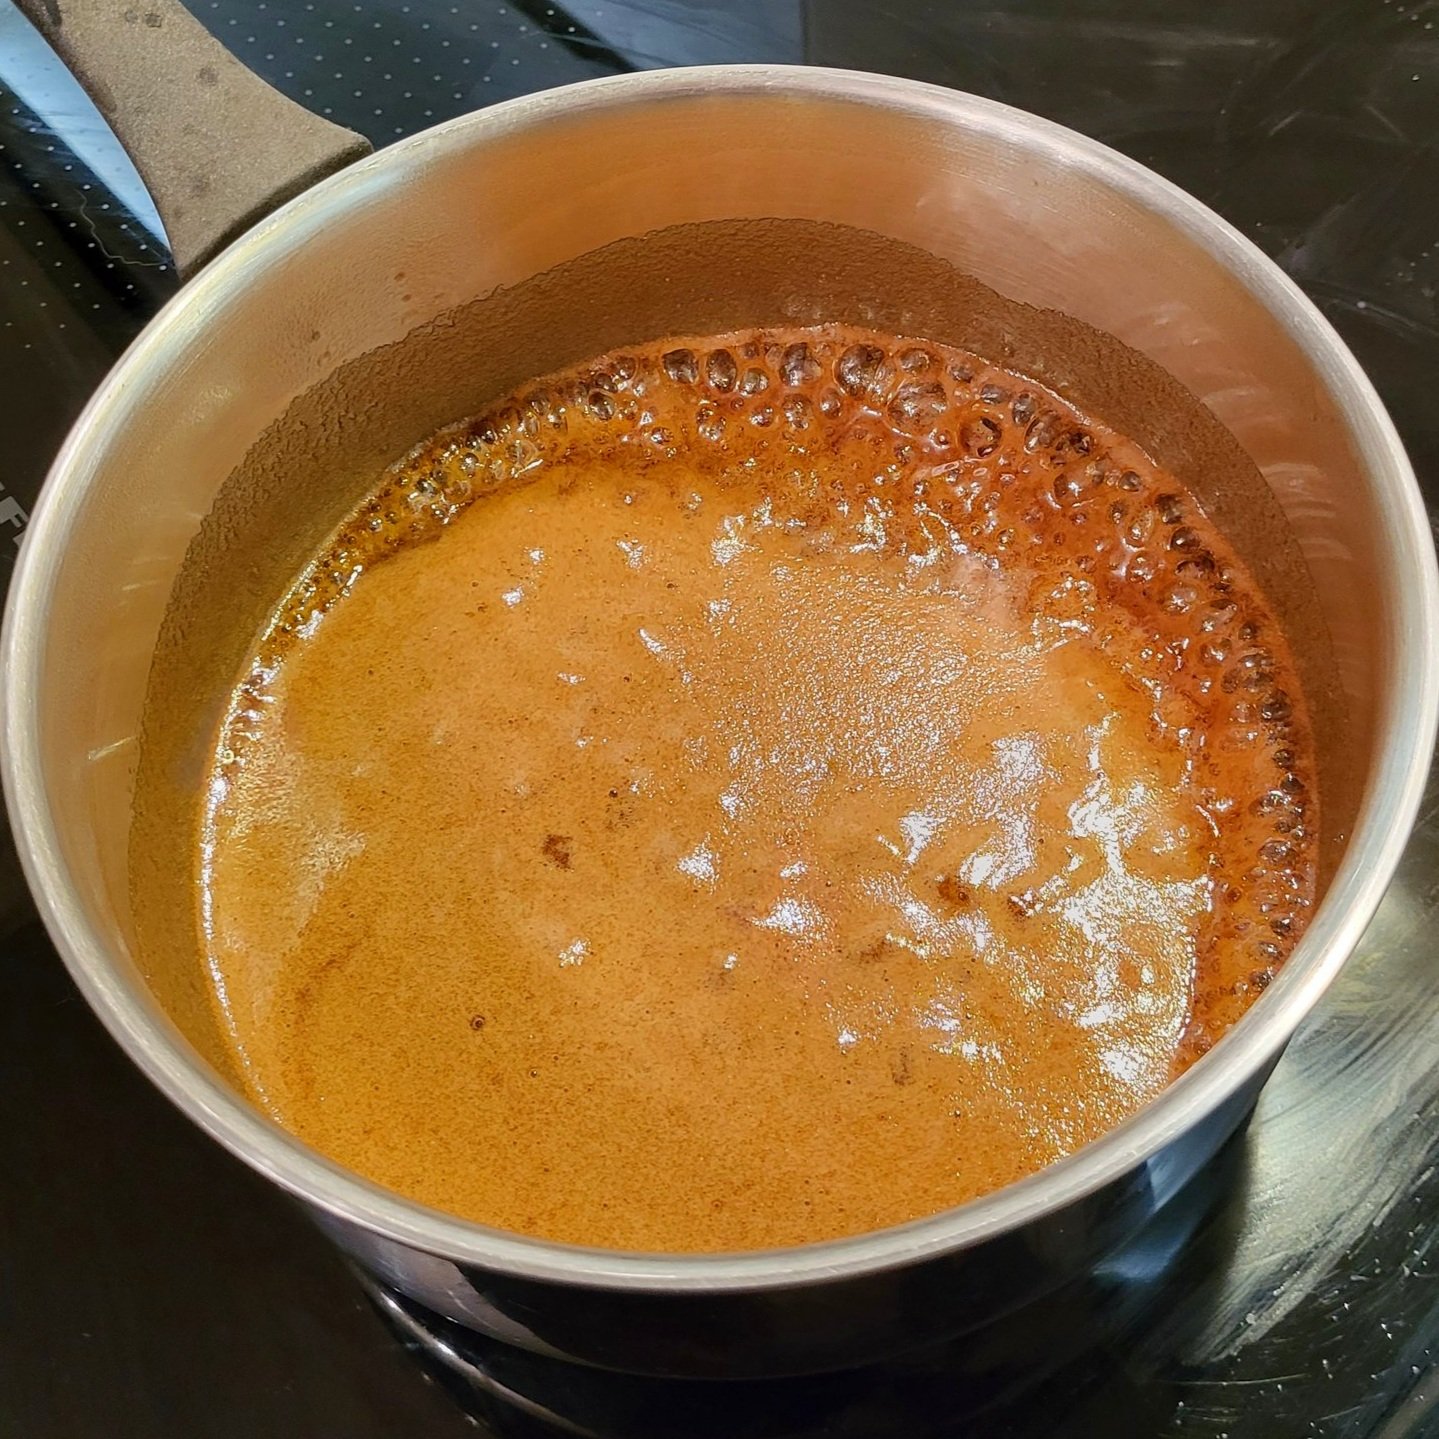 Caramel made in the pan with a rolling simmer